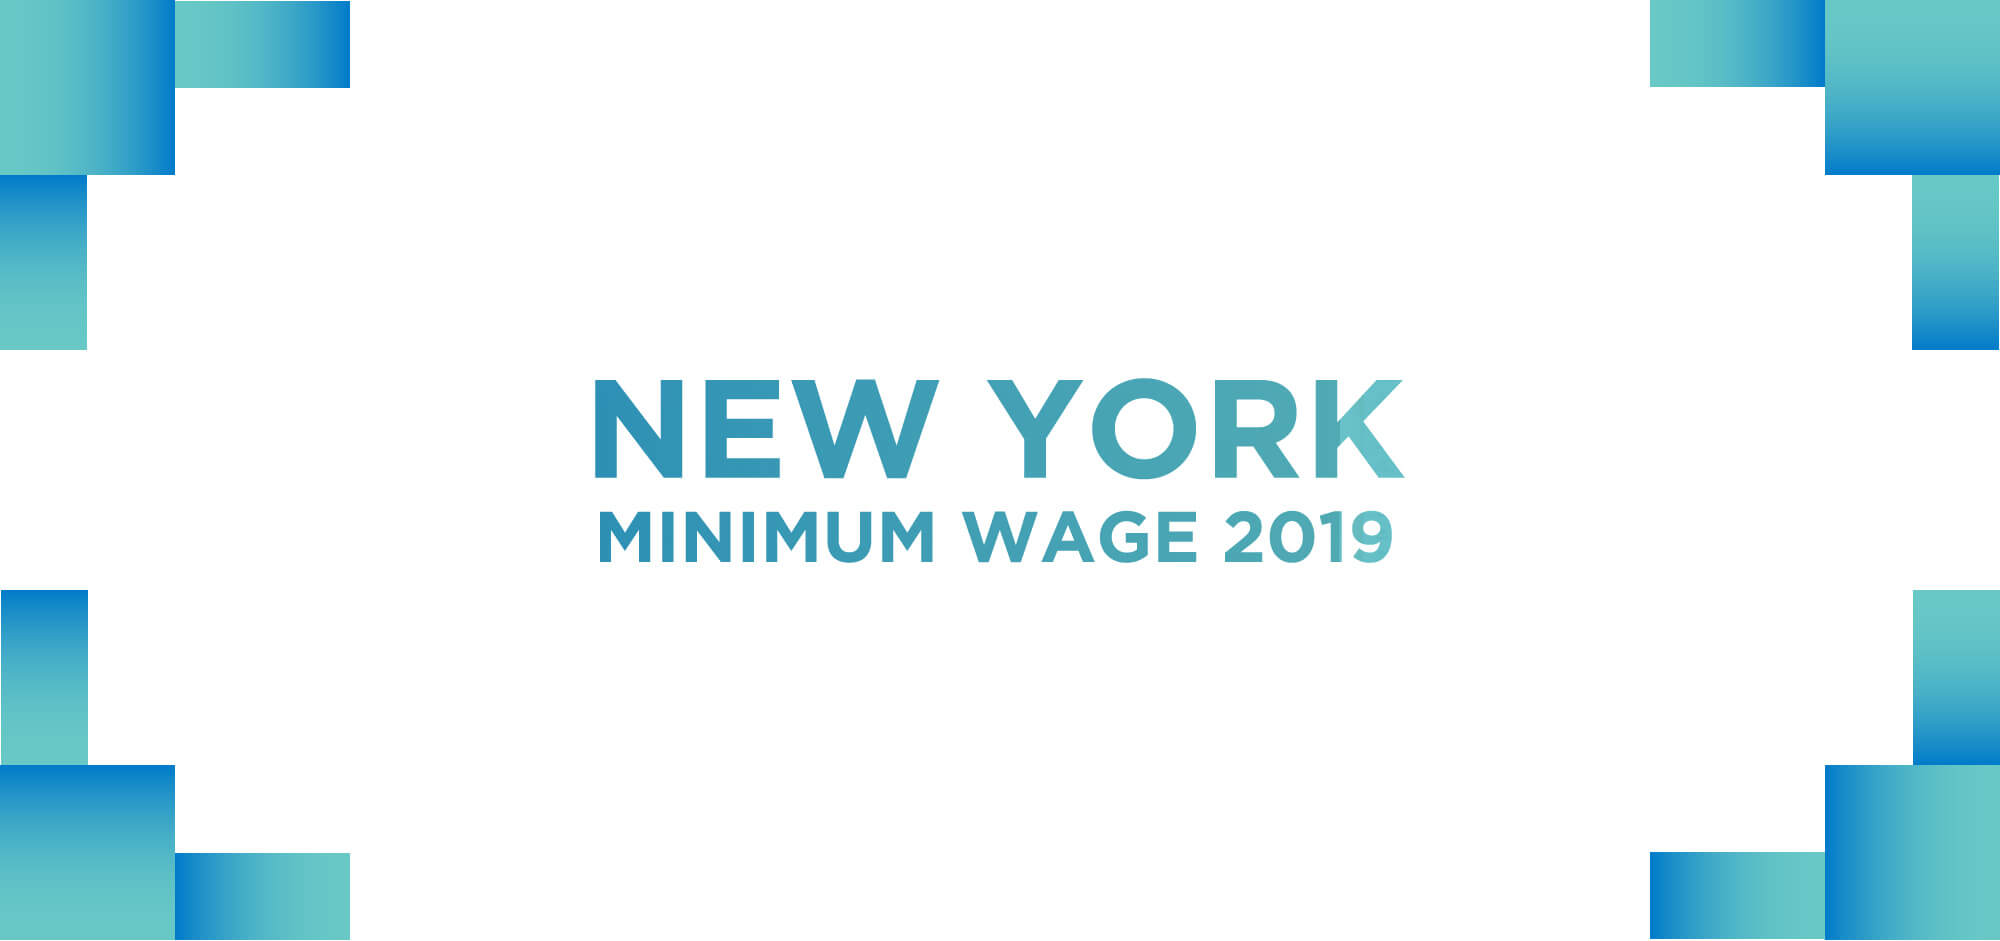 what is minimum wage in new york